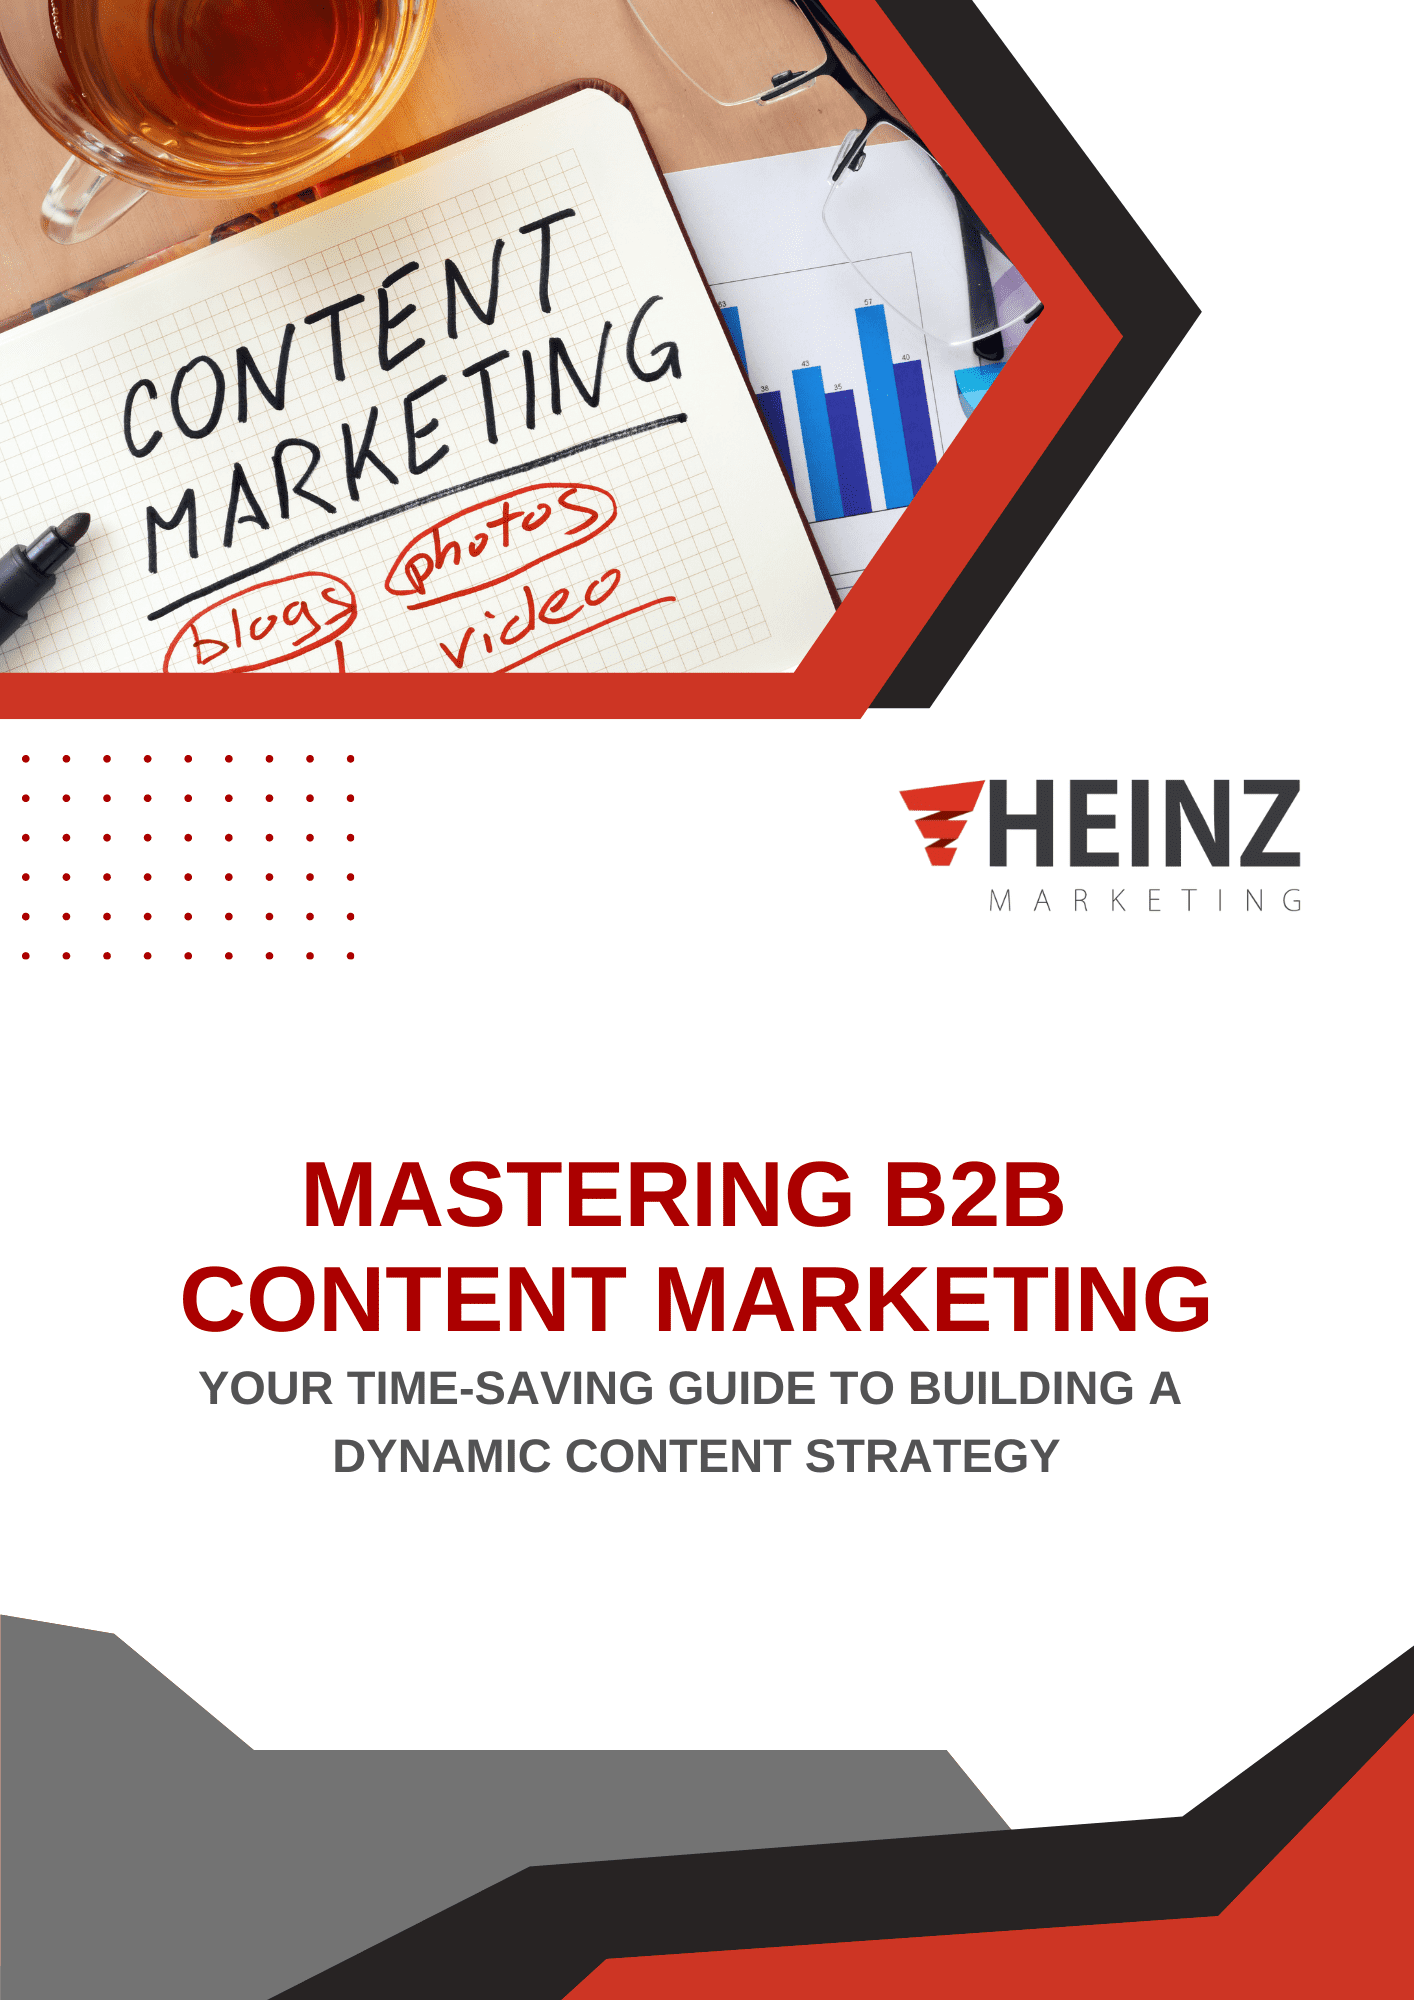 Guide: Mastering B2B Marketing Content